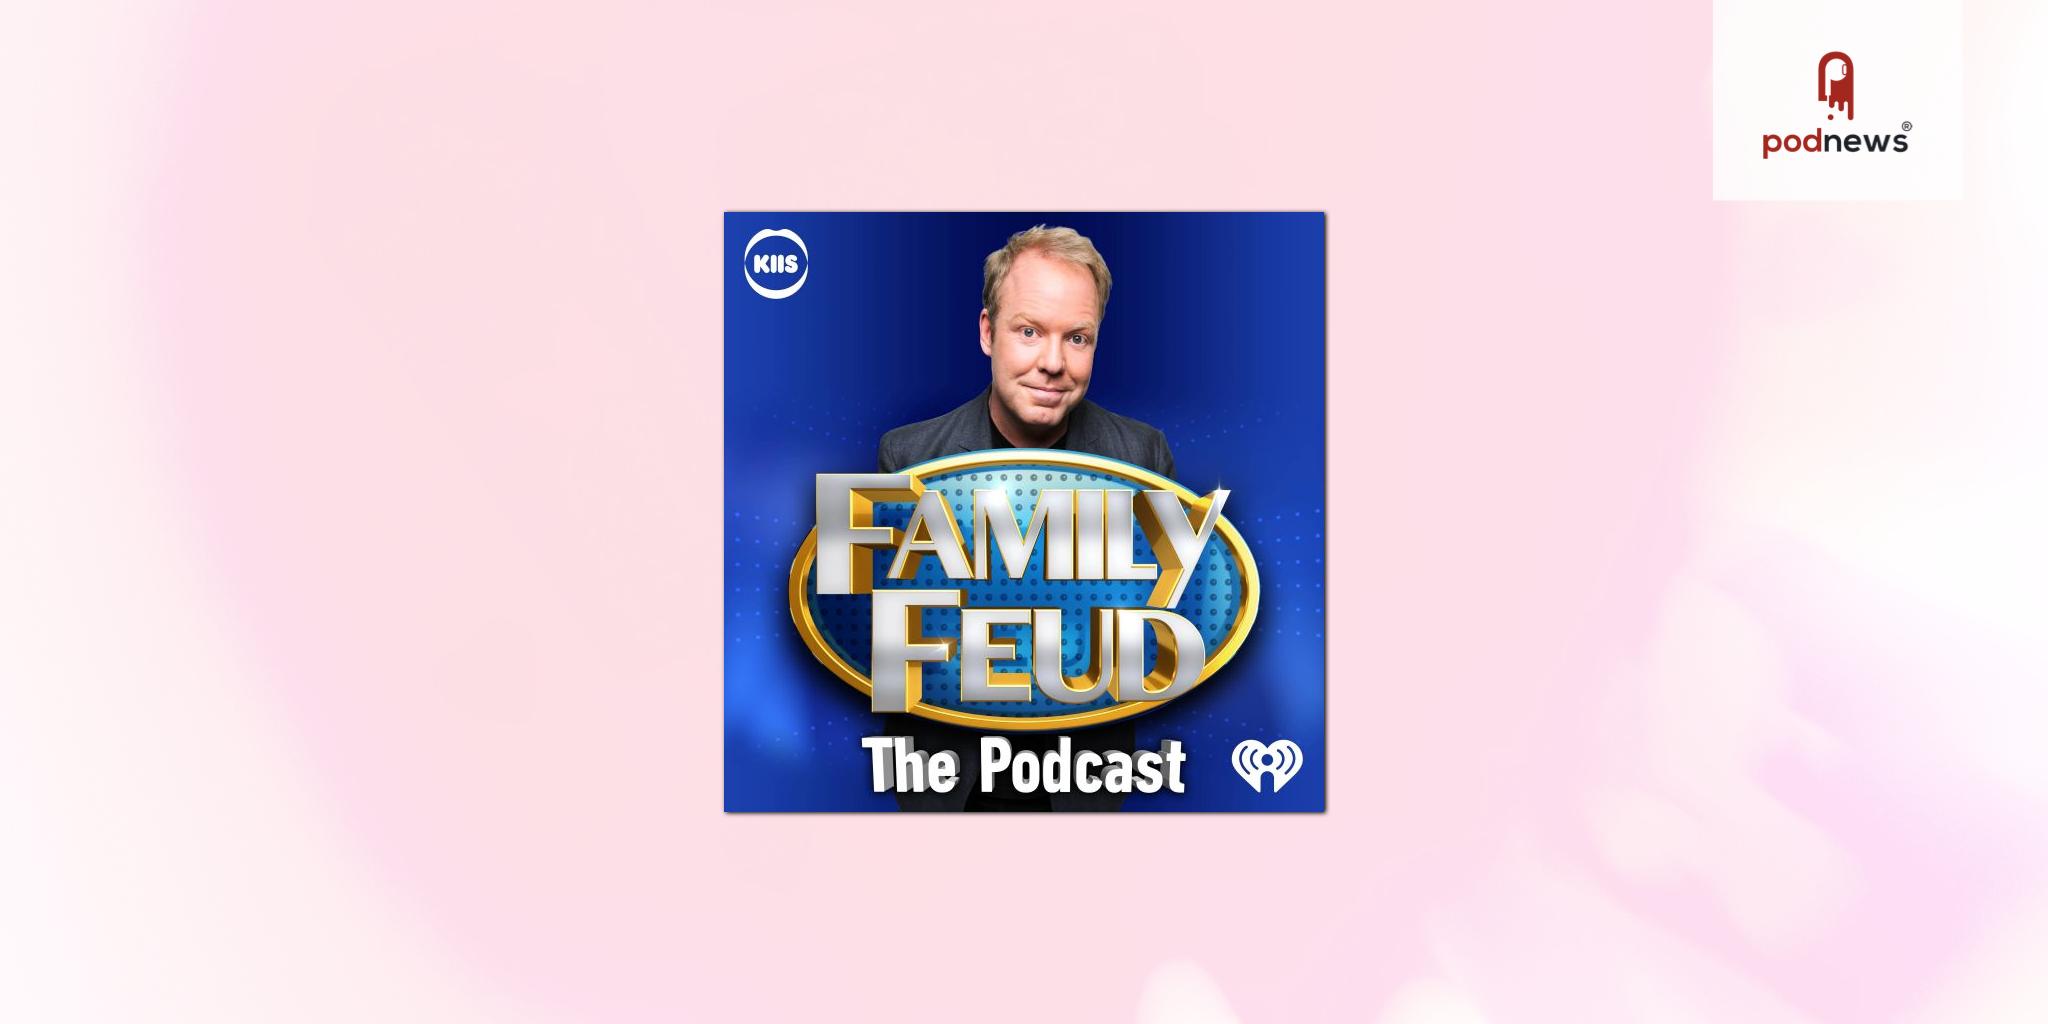 iHeart, Fremantle and KIIS launch iconic game show Family Feud as a podcast